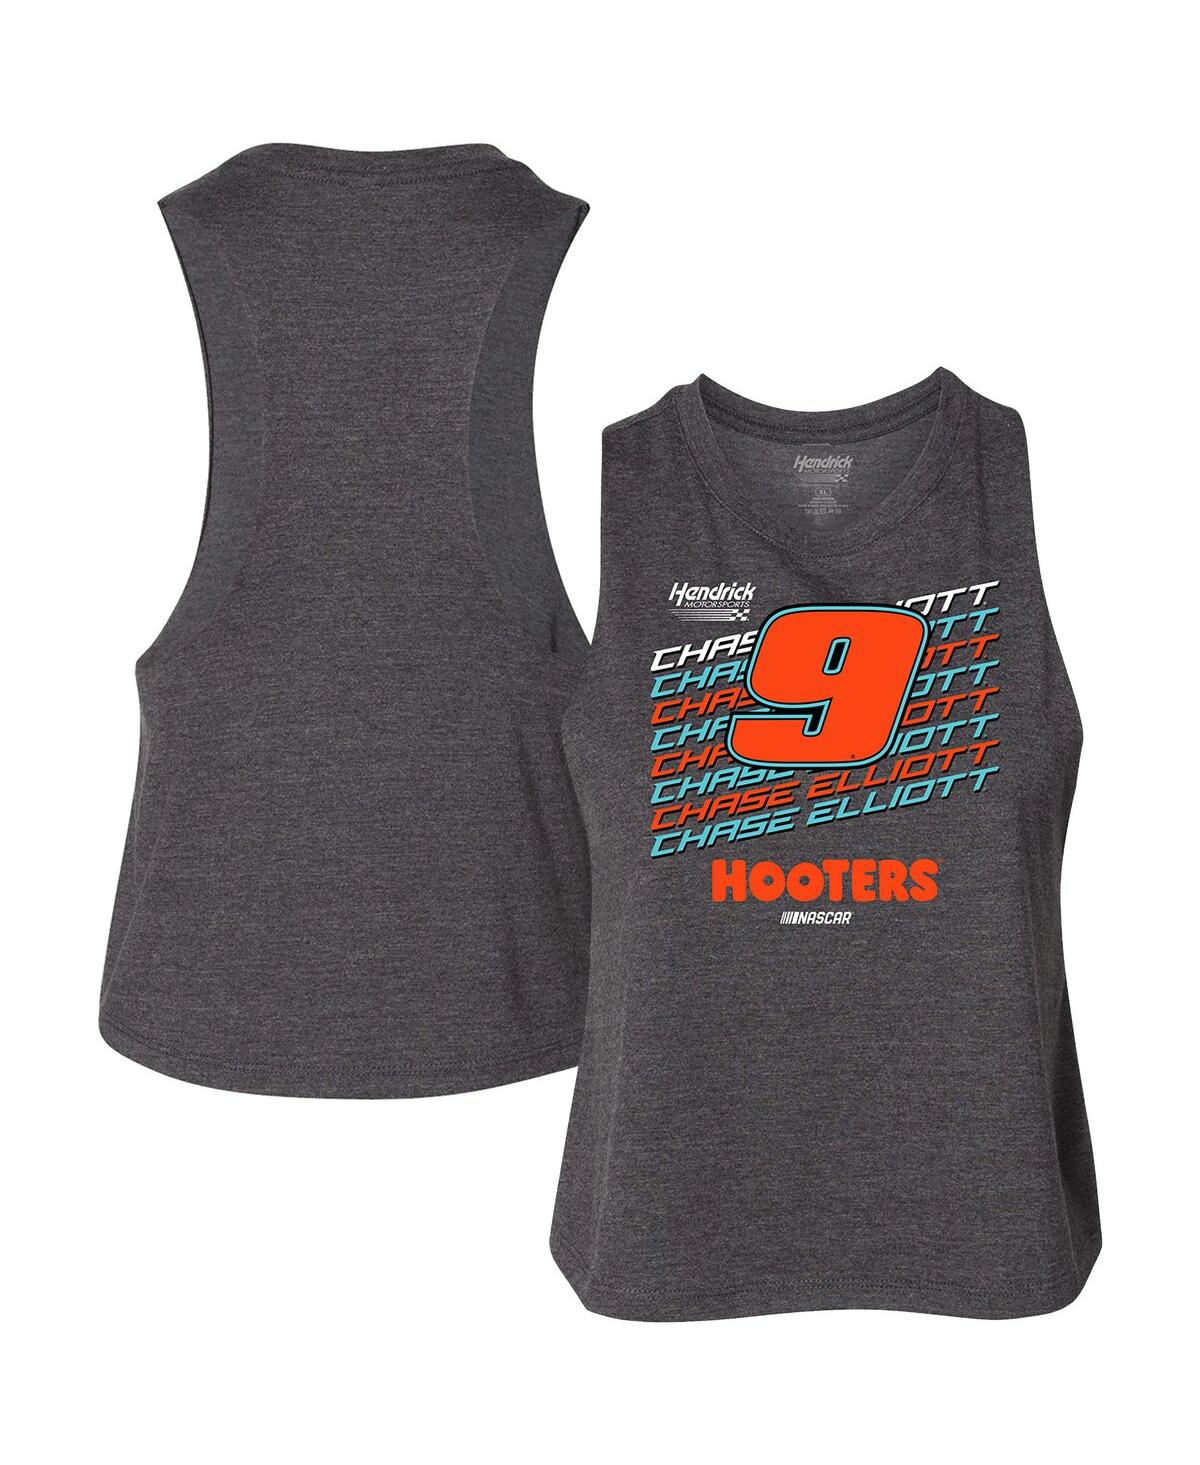 Shop Hendrick Motorsports Team Collection Women's  Heather Charcoal Chase Elliott Hooters Racer Back Tank